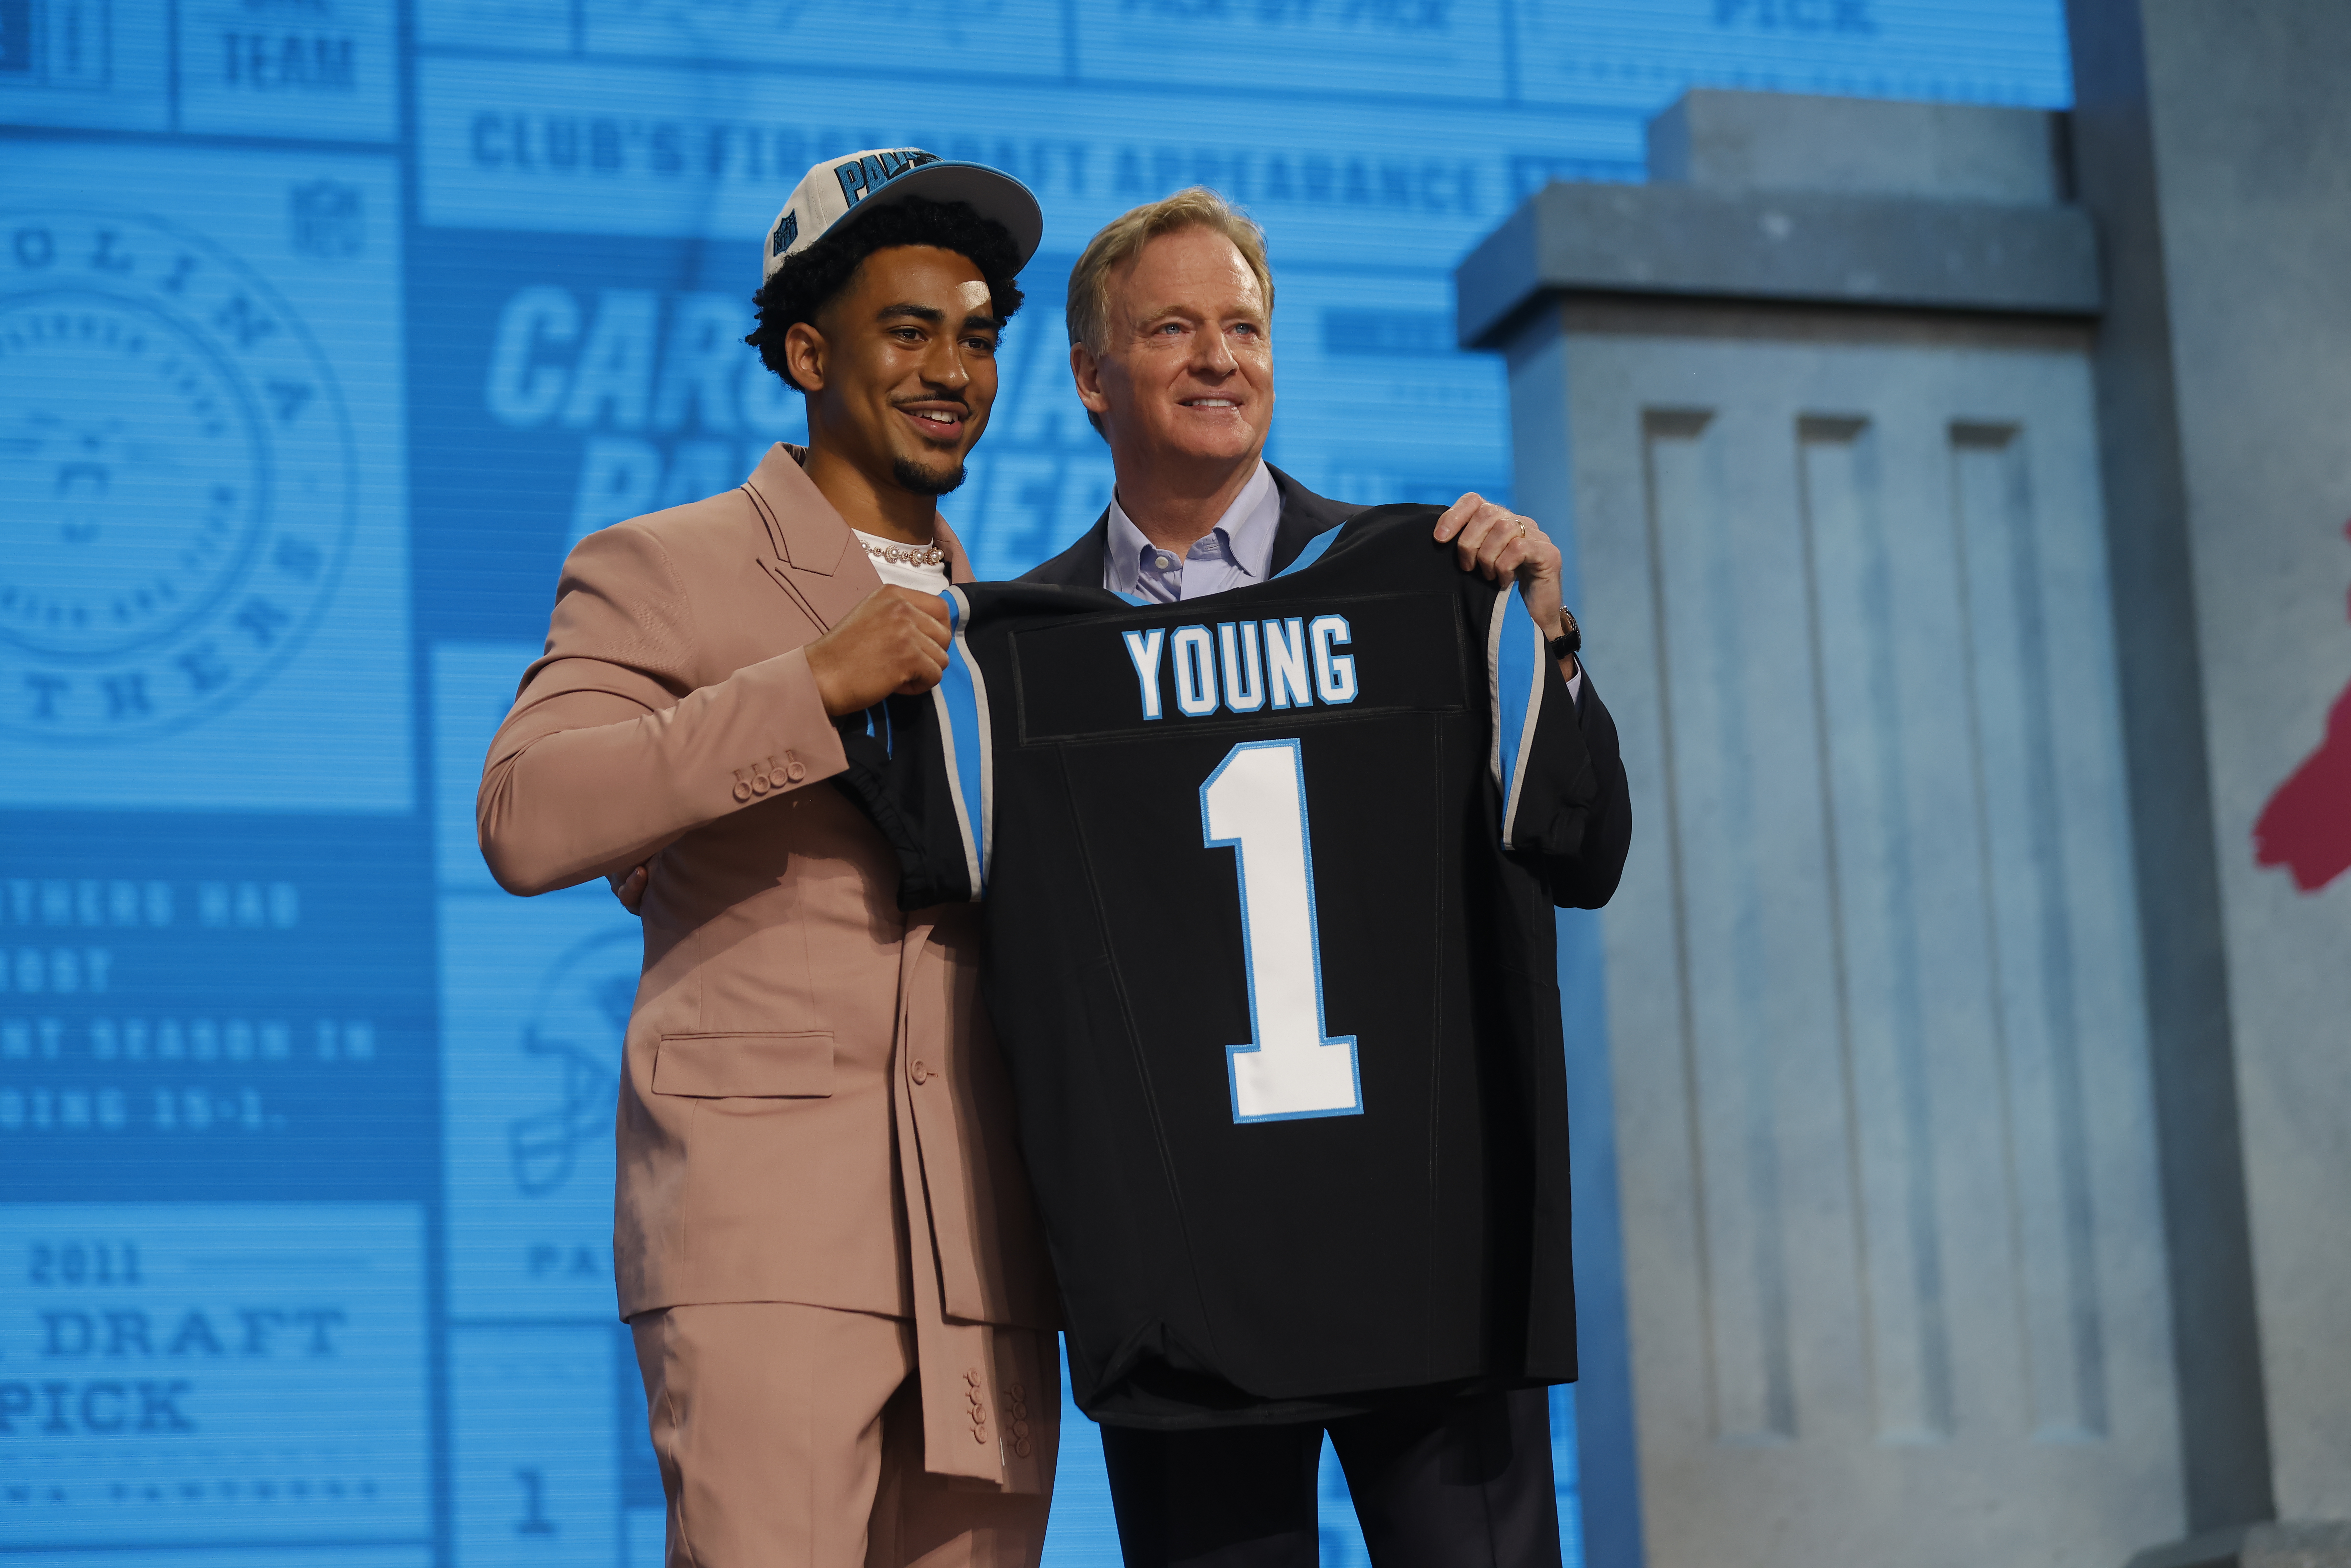 KANSAS CITY, MISSOURI - APRIL 27: (L-R) Bryce Young poses with NFL Commissioner Roger Goodell after being selected first overall by the Carolina Panthers during the first round of the 2023 NFL Draft at Union Station on April 27, 2023 in Kansas City, Missouri. (Photo by David Eulitt/Getty Images)